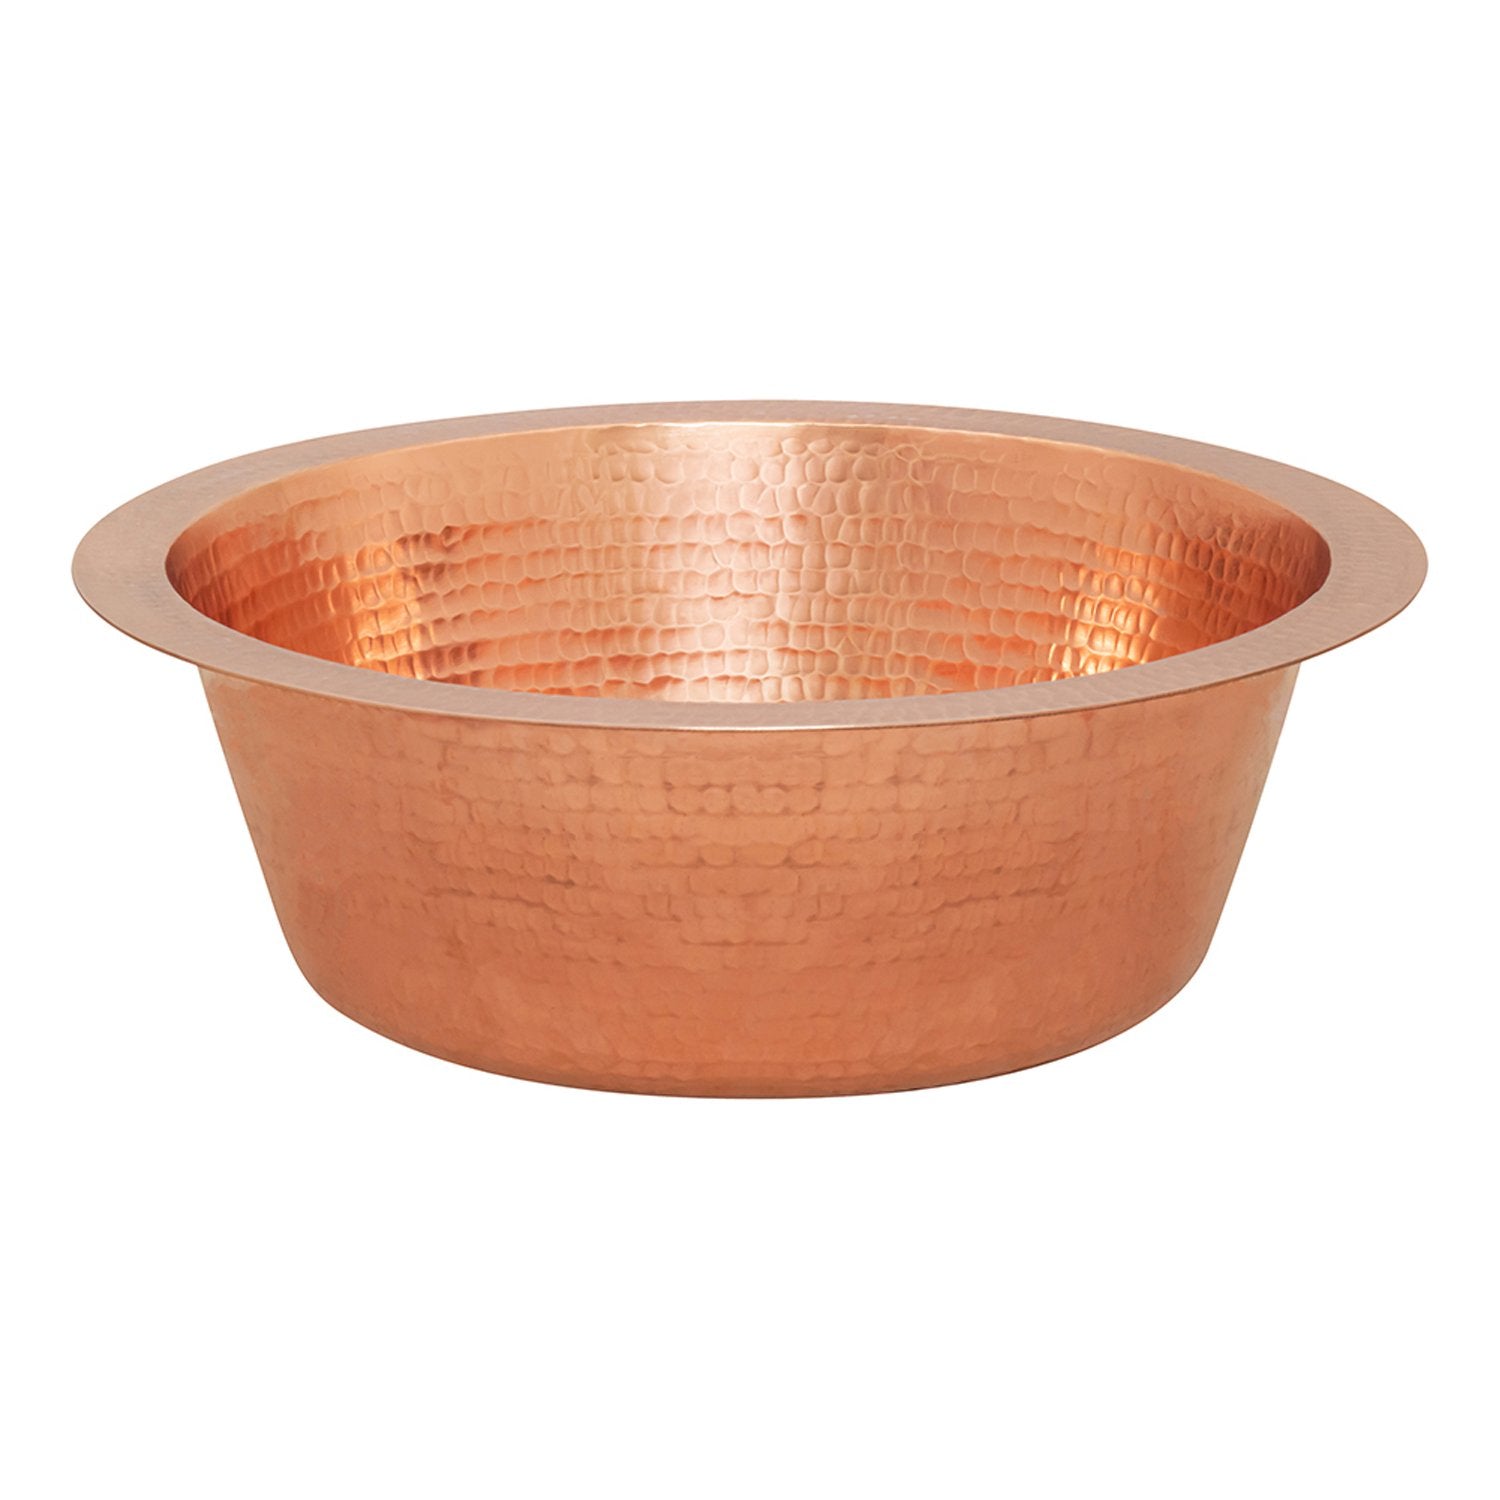 14" Round Hammered Copper Bar Sink with 2" Drain Opening in Polished Copper